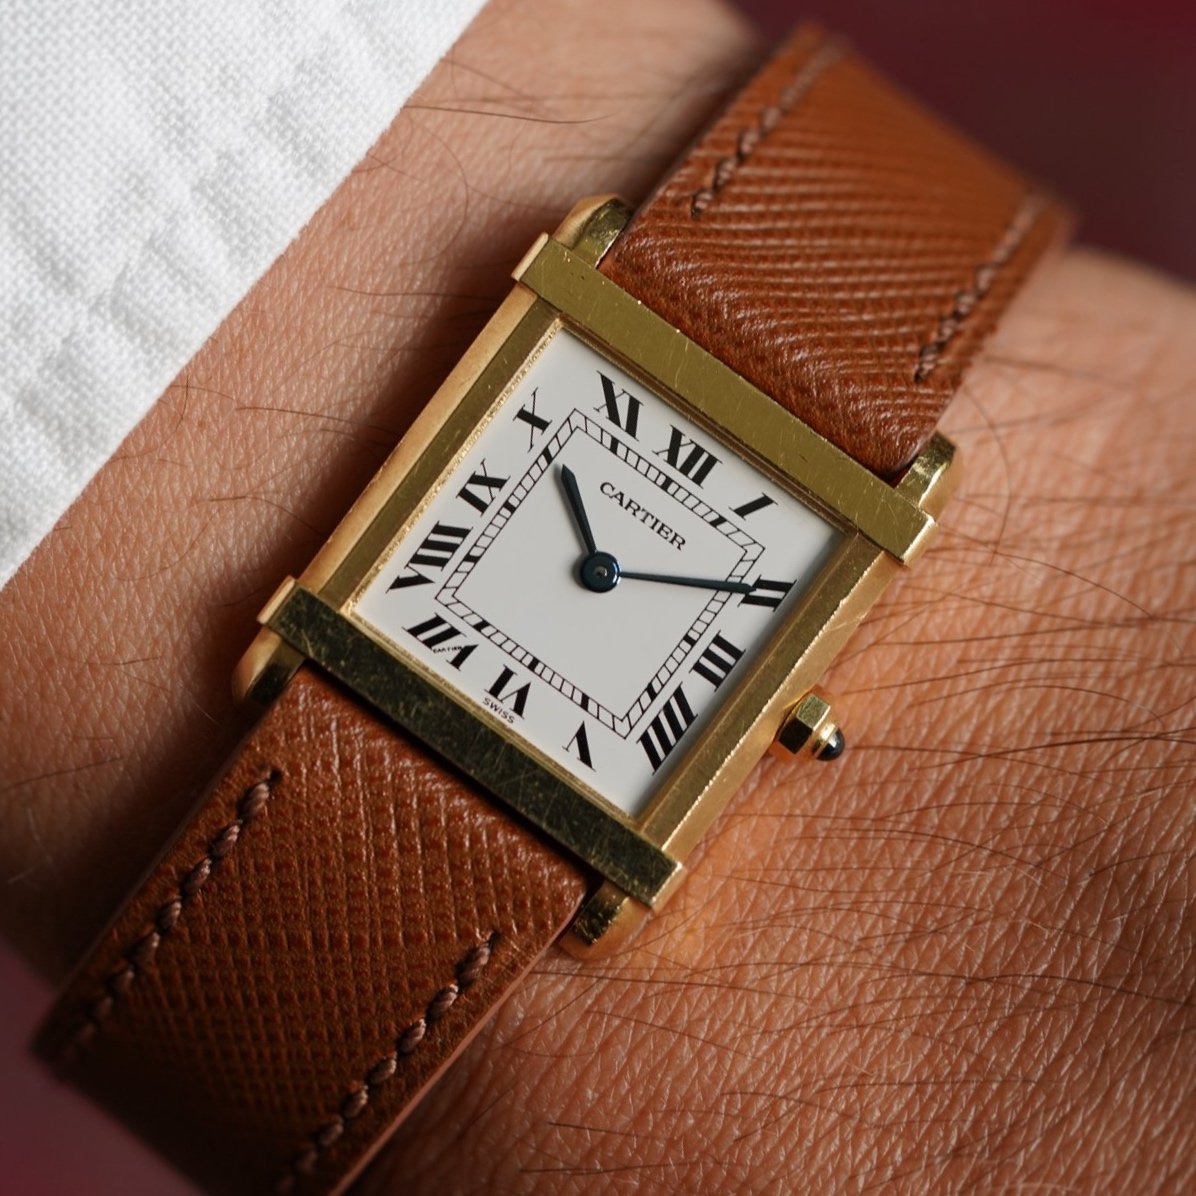 Cartier Tank Chinoise in 18K Yellow Gold Unpolished